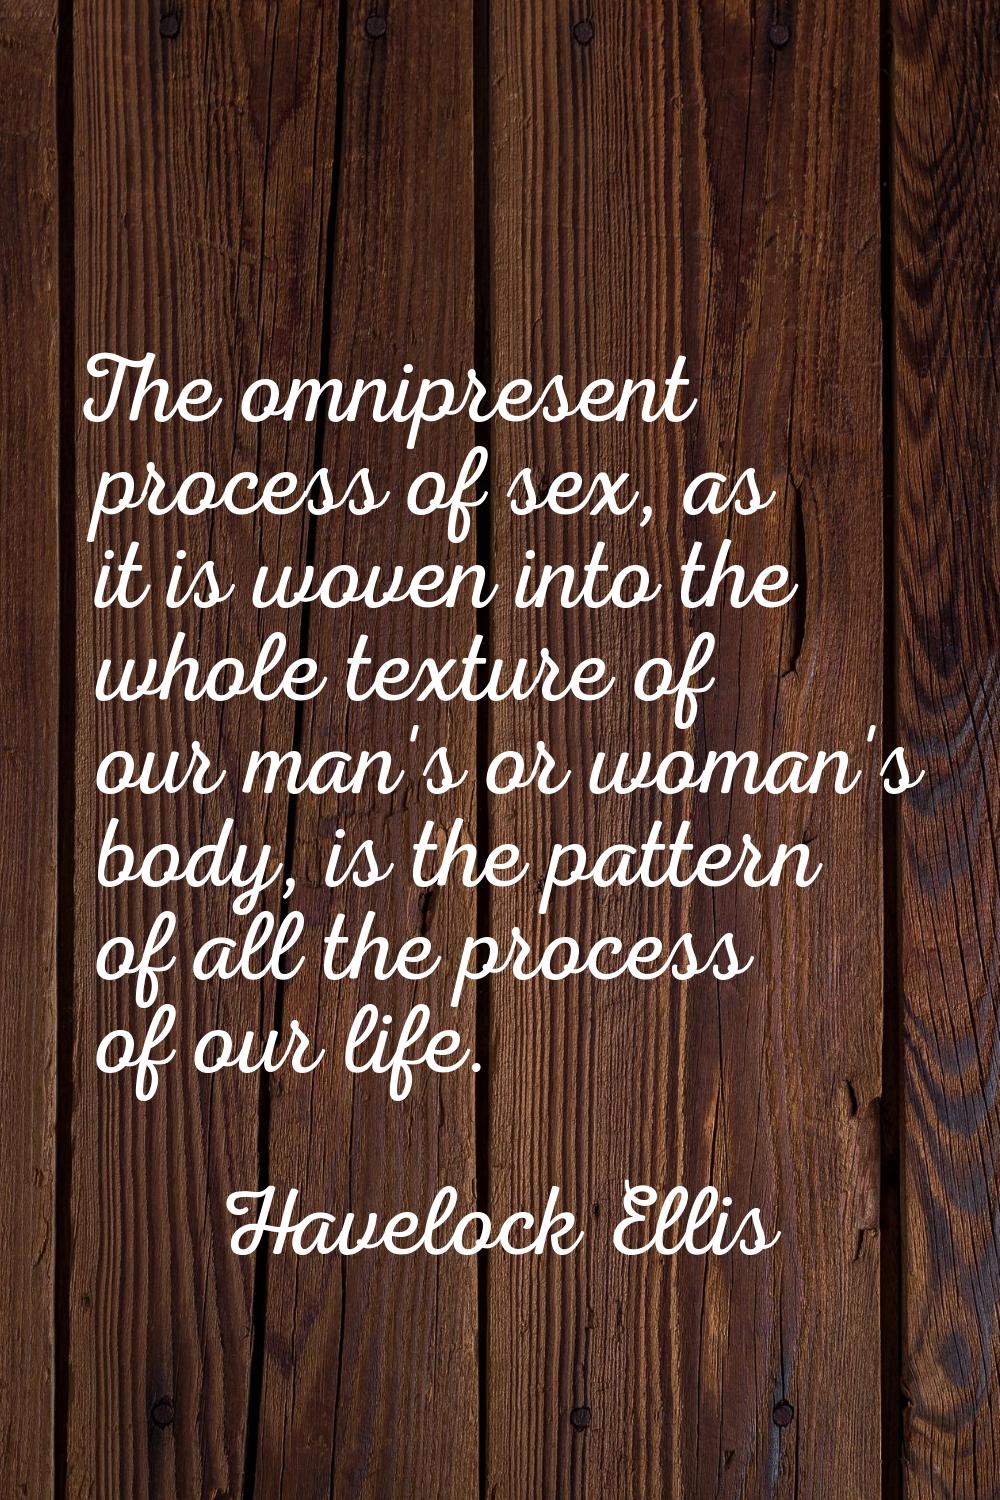 The omnipresent process of sex, as it is woven into the whole texture of our man's or woman's body,